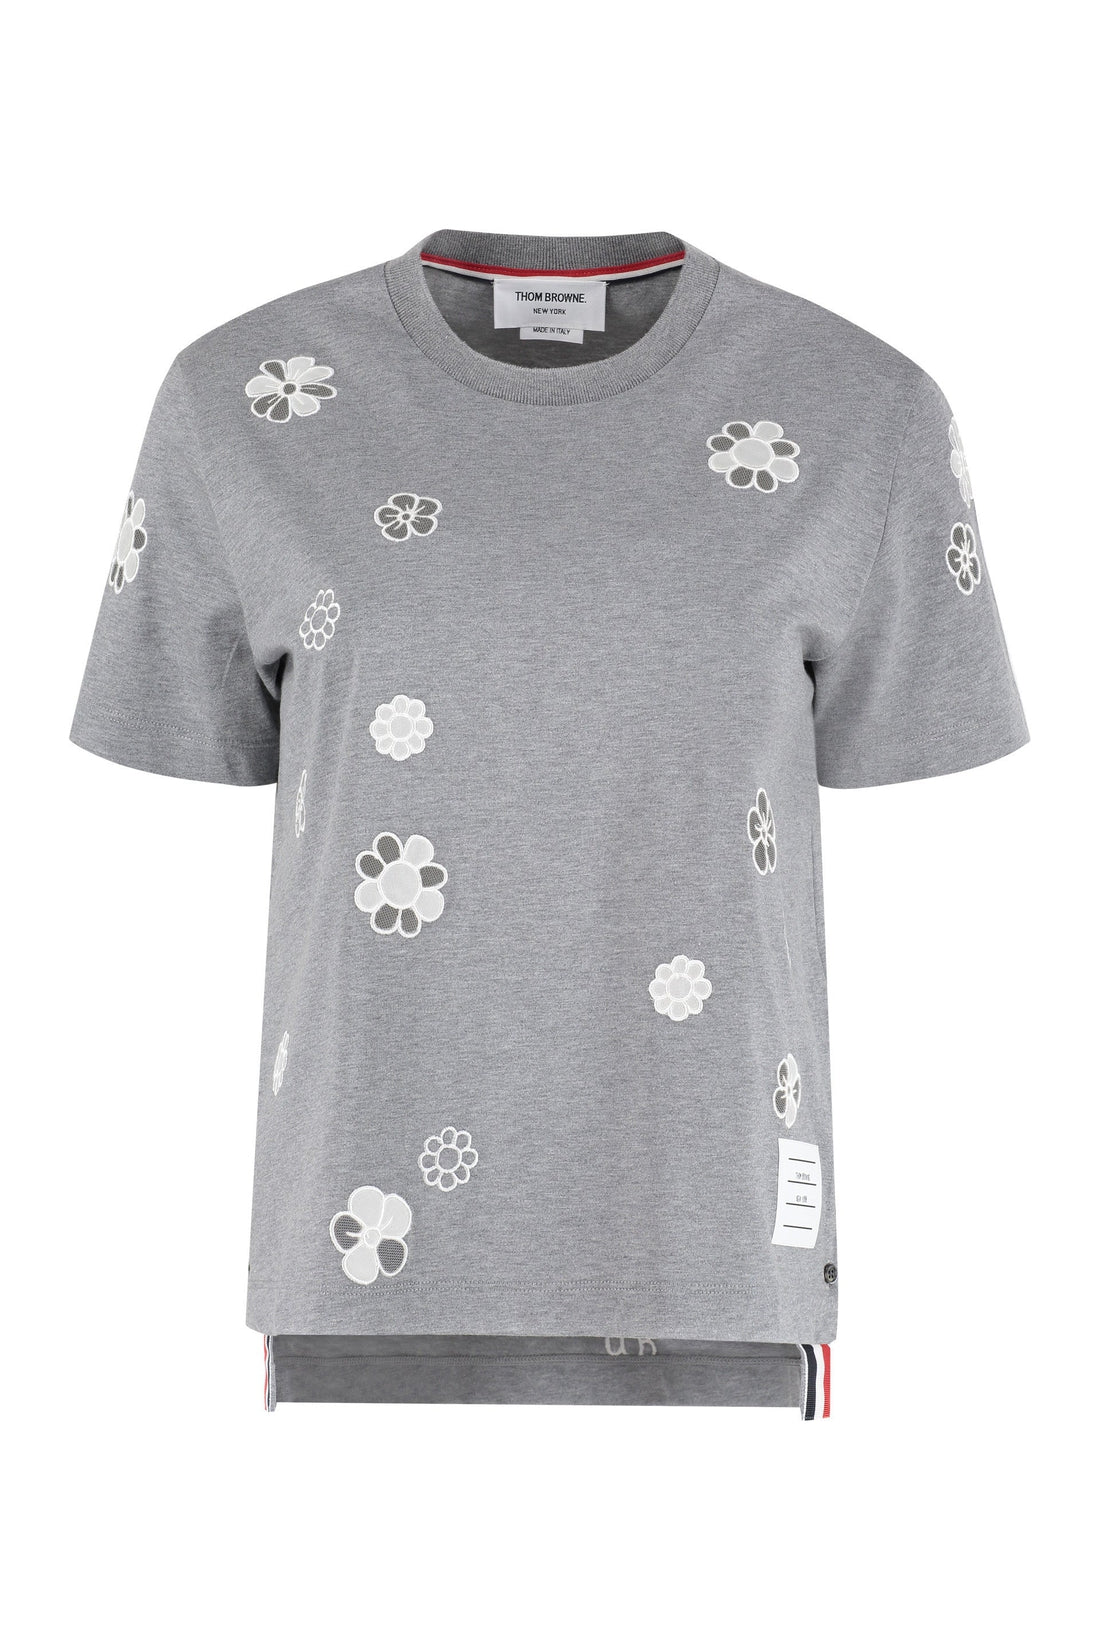 Thom Browne-OUTLET-SALE-Embroidered cotton T-shirt-ARCHIVIST